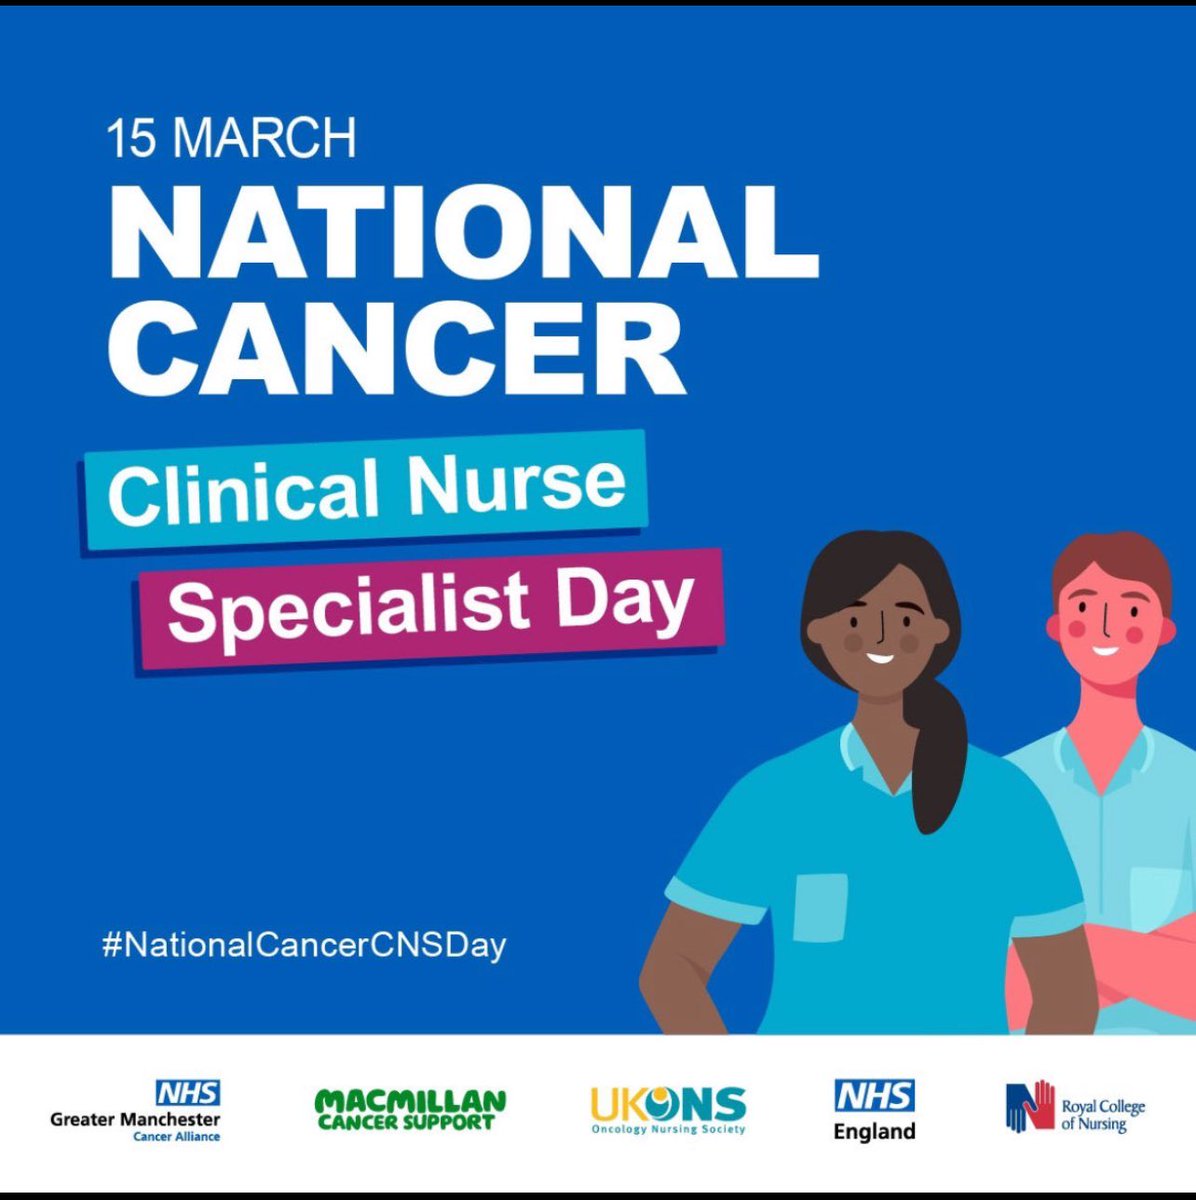 So proud to work with an exceptional group of CNS’s who go above and beyond every day with compassion, professionalism and passion. Today is your day to celebrate! @TheChristieNHS #NationalCancerCNSDay